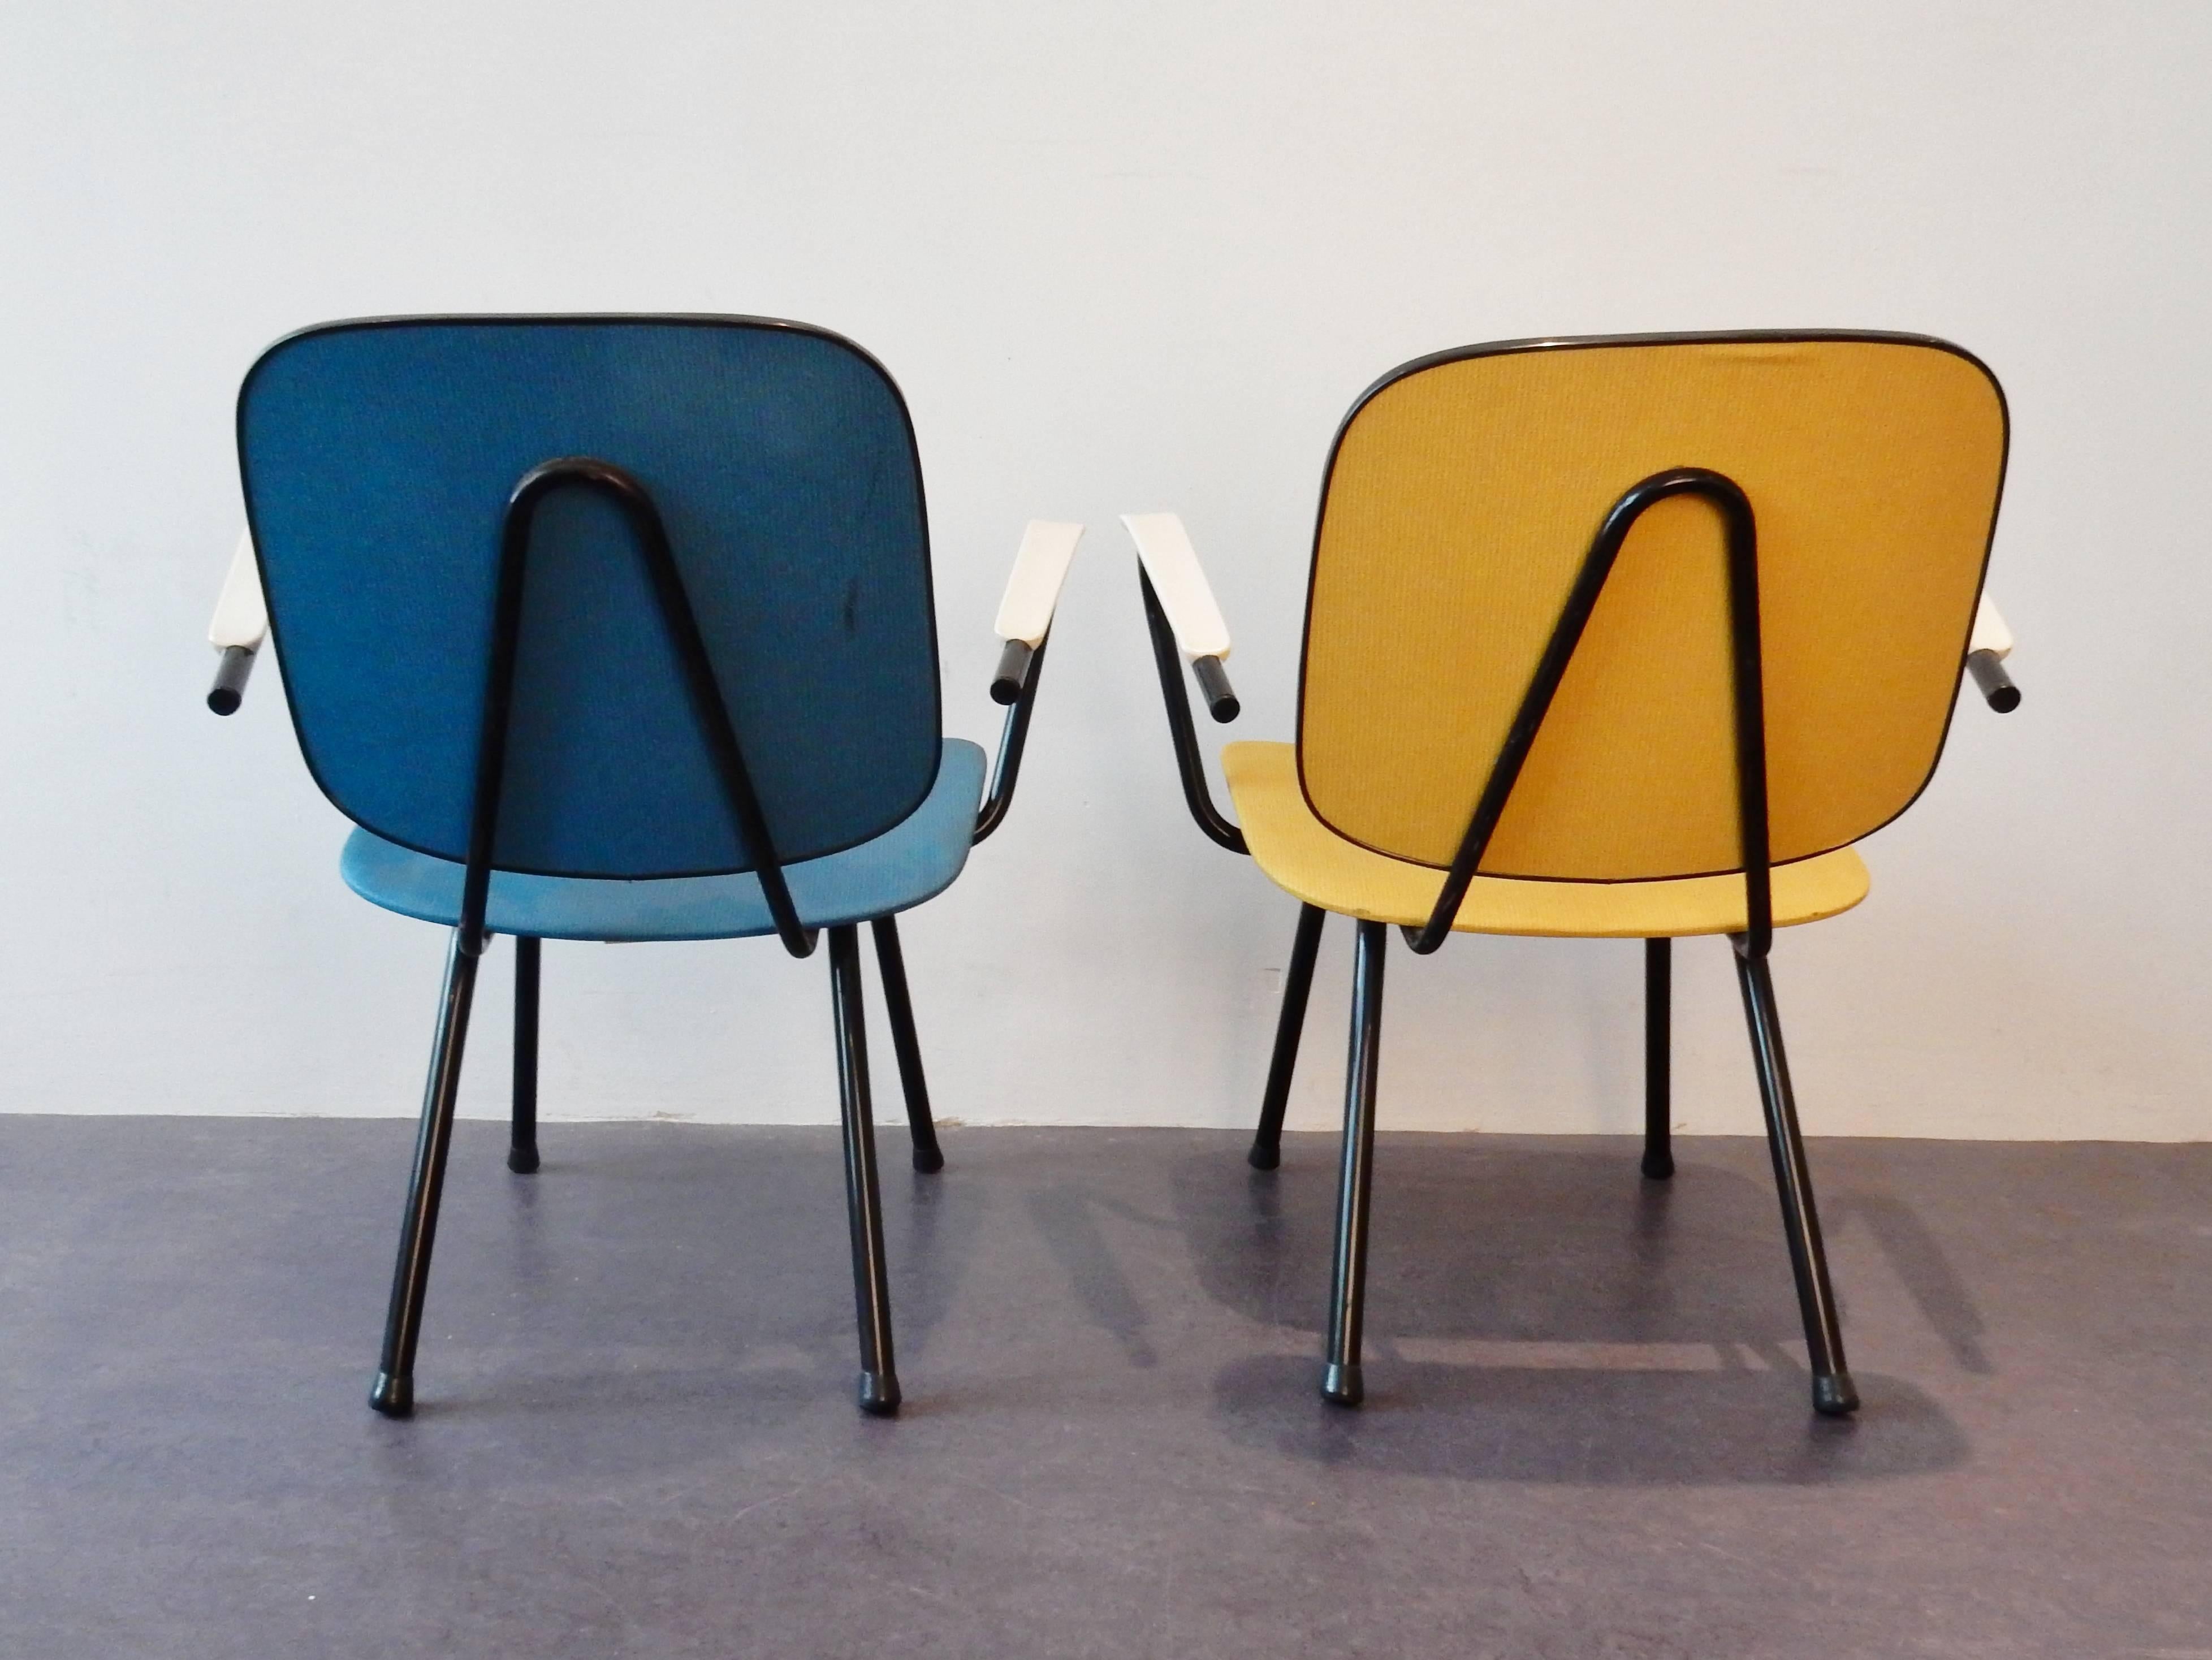 Metal Set of Two Lovely Lower Armchairs in Blue and Yellow, 1950s-1960s For Sale